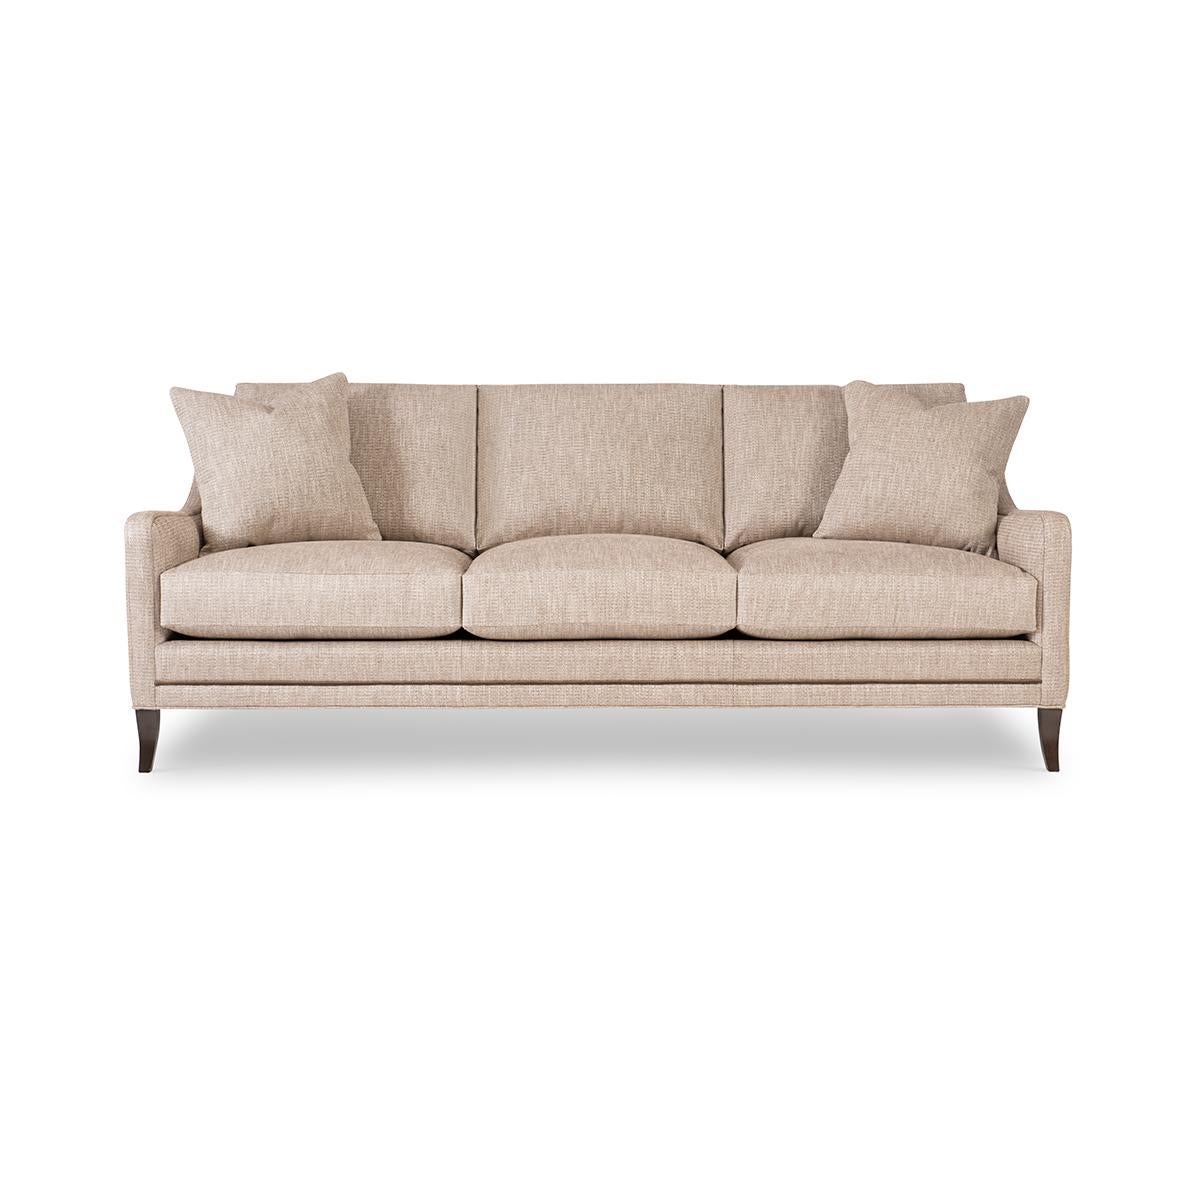 With three loose back cushions and boxed cushion seats, with low profile arms, raised on flared tapered legs, with framed trimwork to the sides.

Proudly made in the USA, each piece boasts traditional 8-way hand-tied construction and toxin-free,